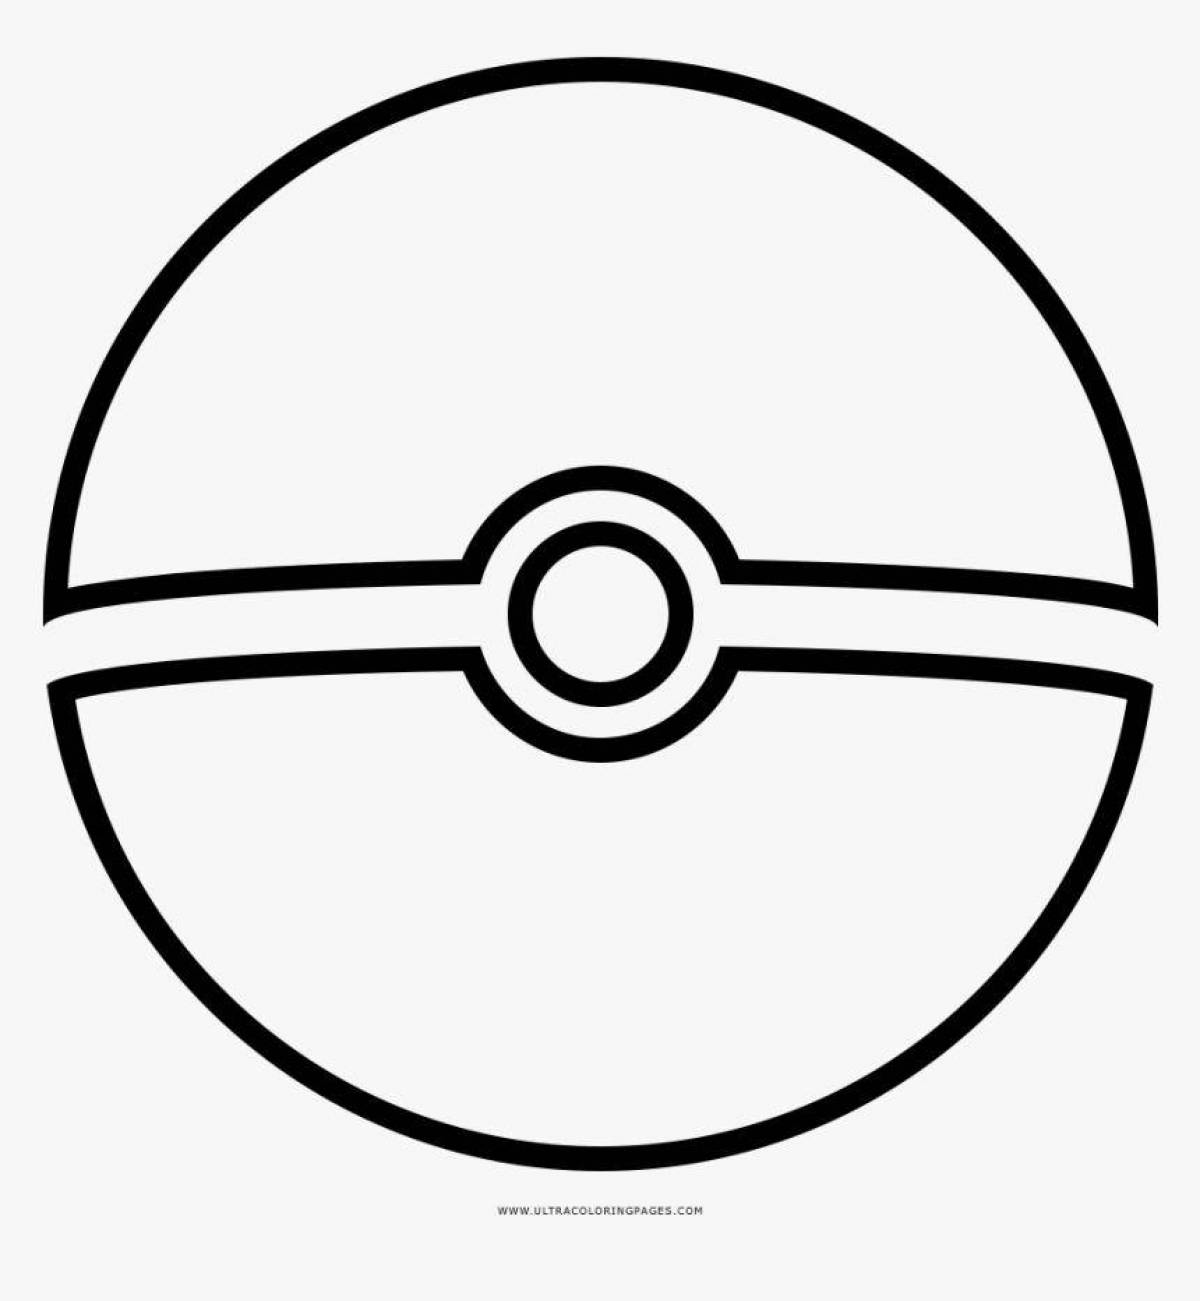 Colorful pokeball coloring page